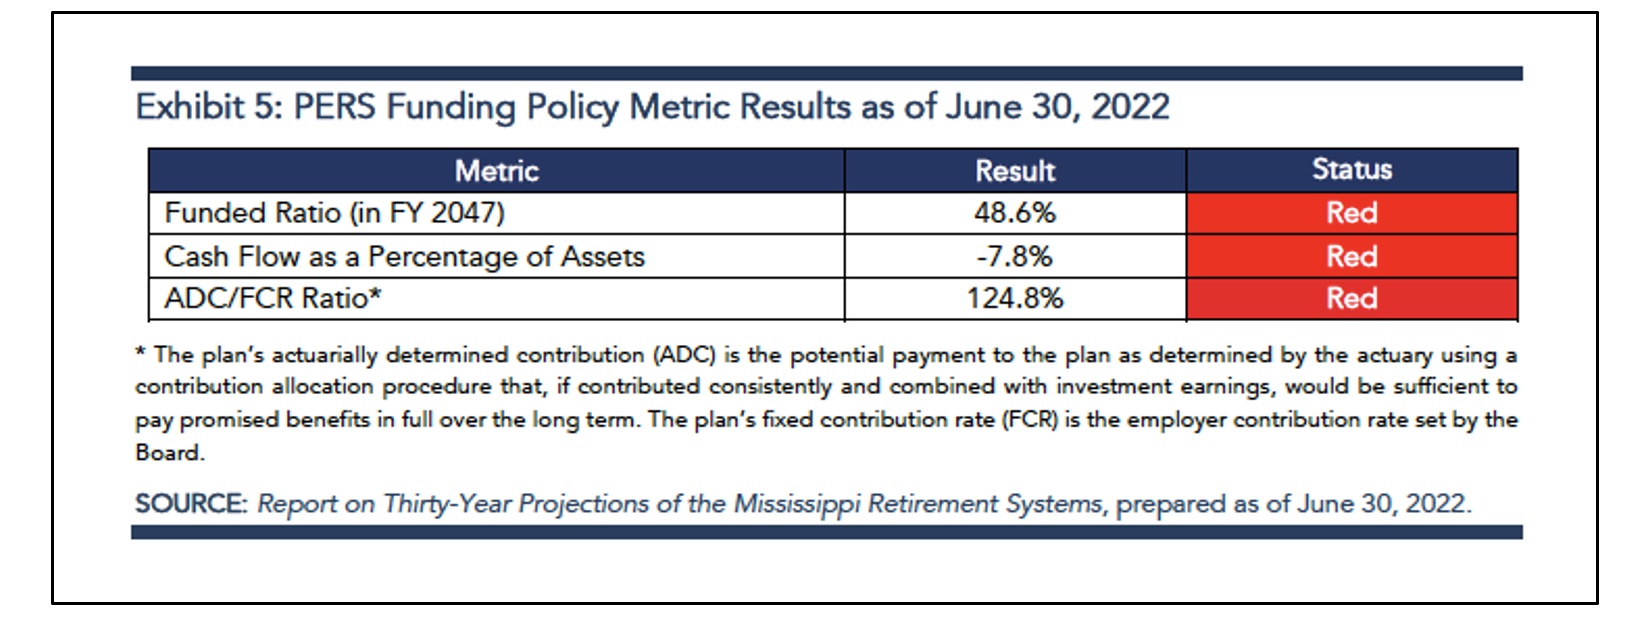 PERS Funding Policy Metric Results as of June 2022